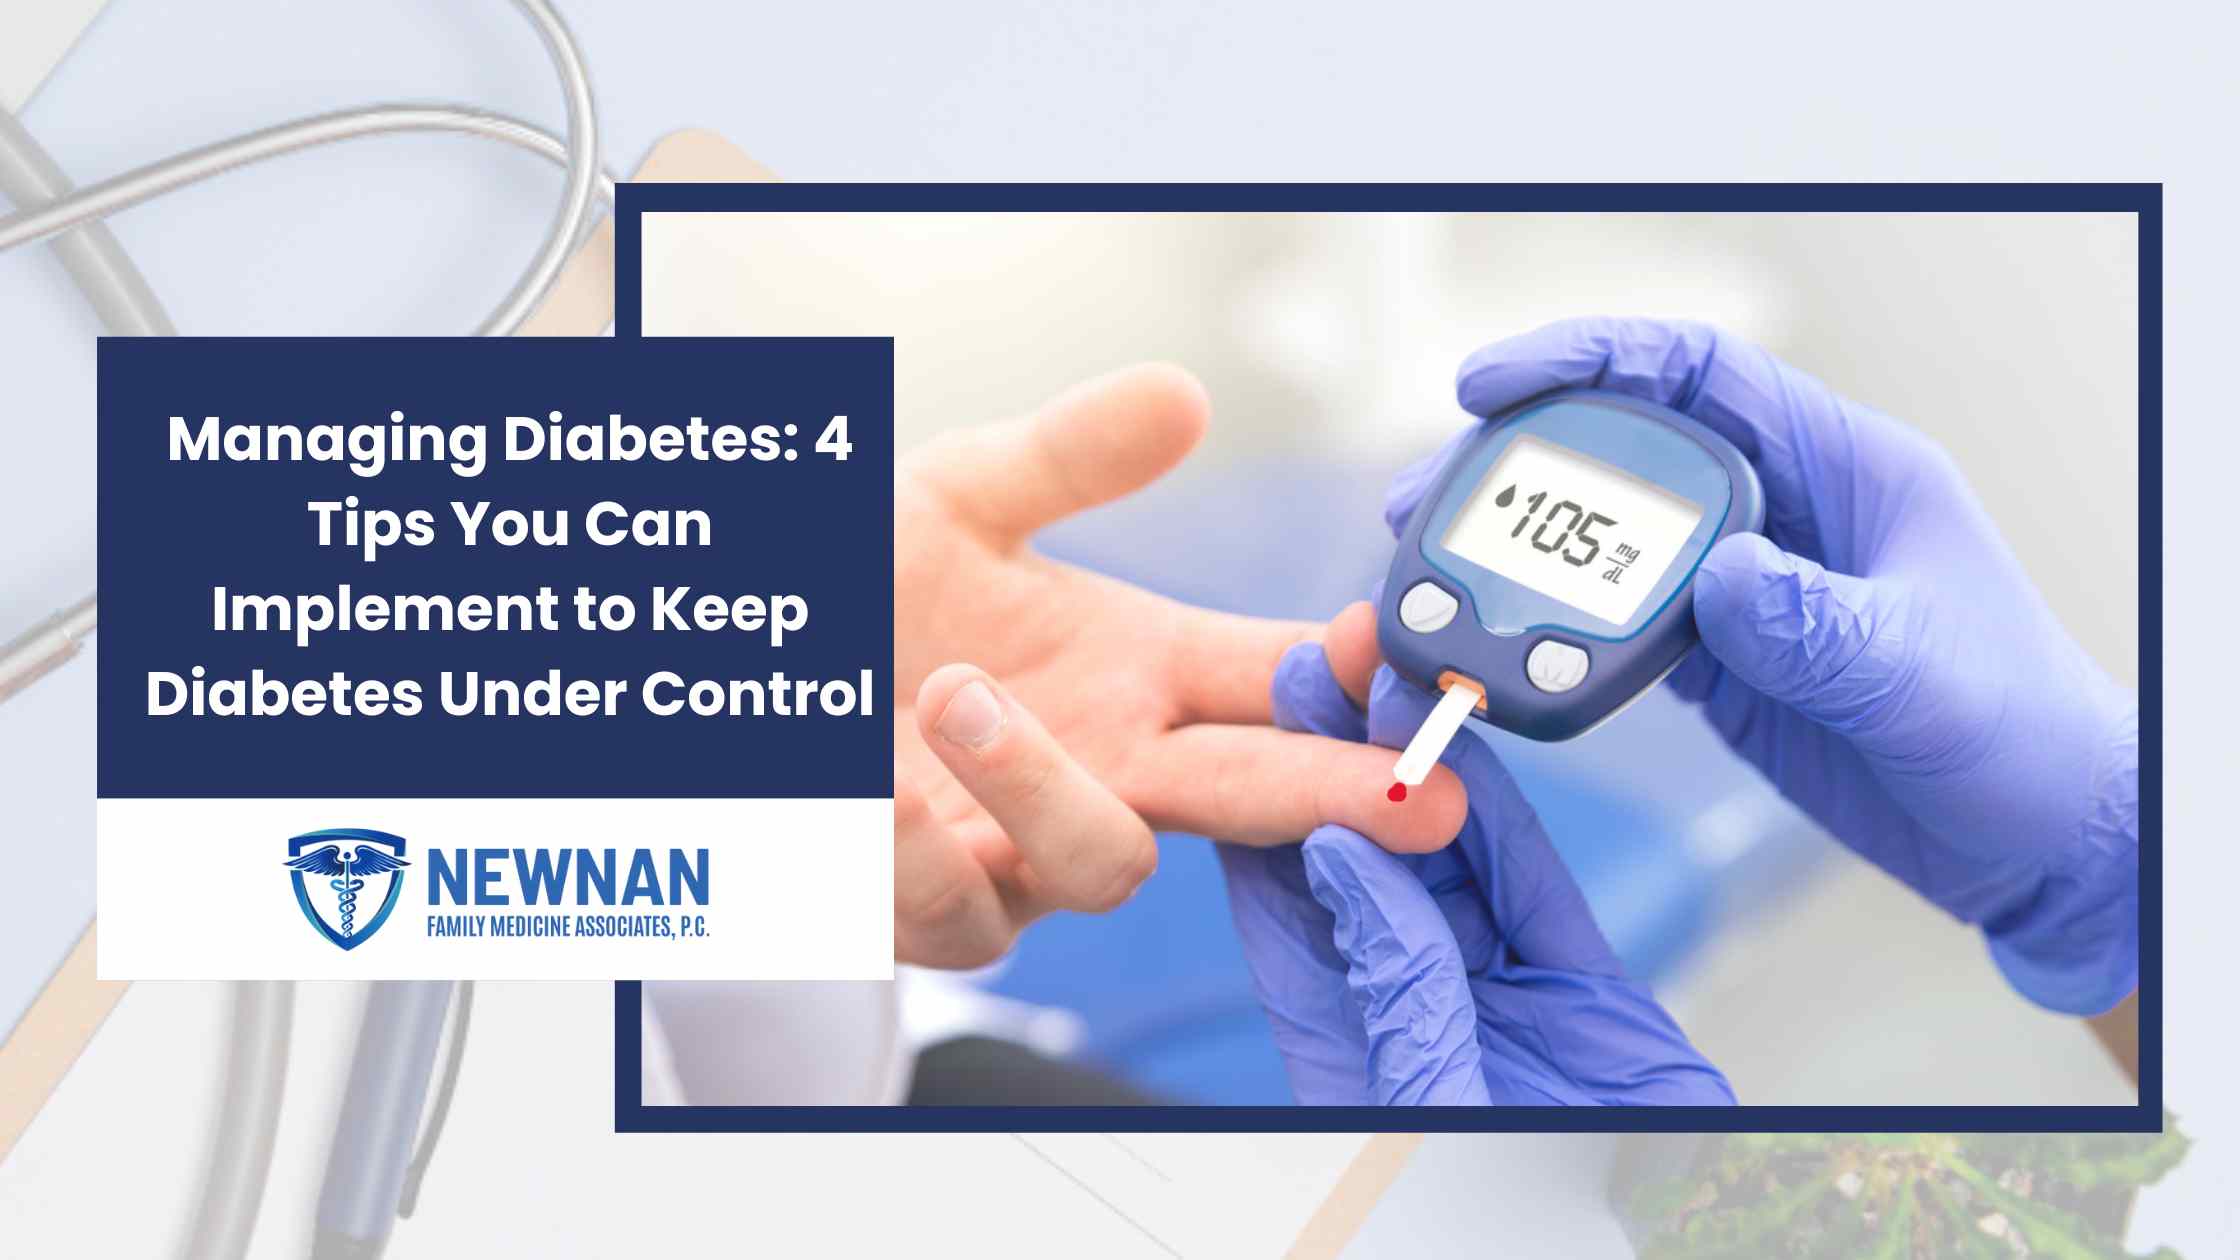 Managing Diabetes: 4 Tips You Can Implement to Keep Diabetes Under Control